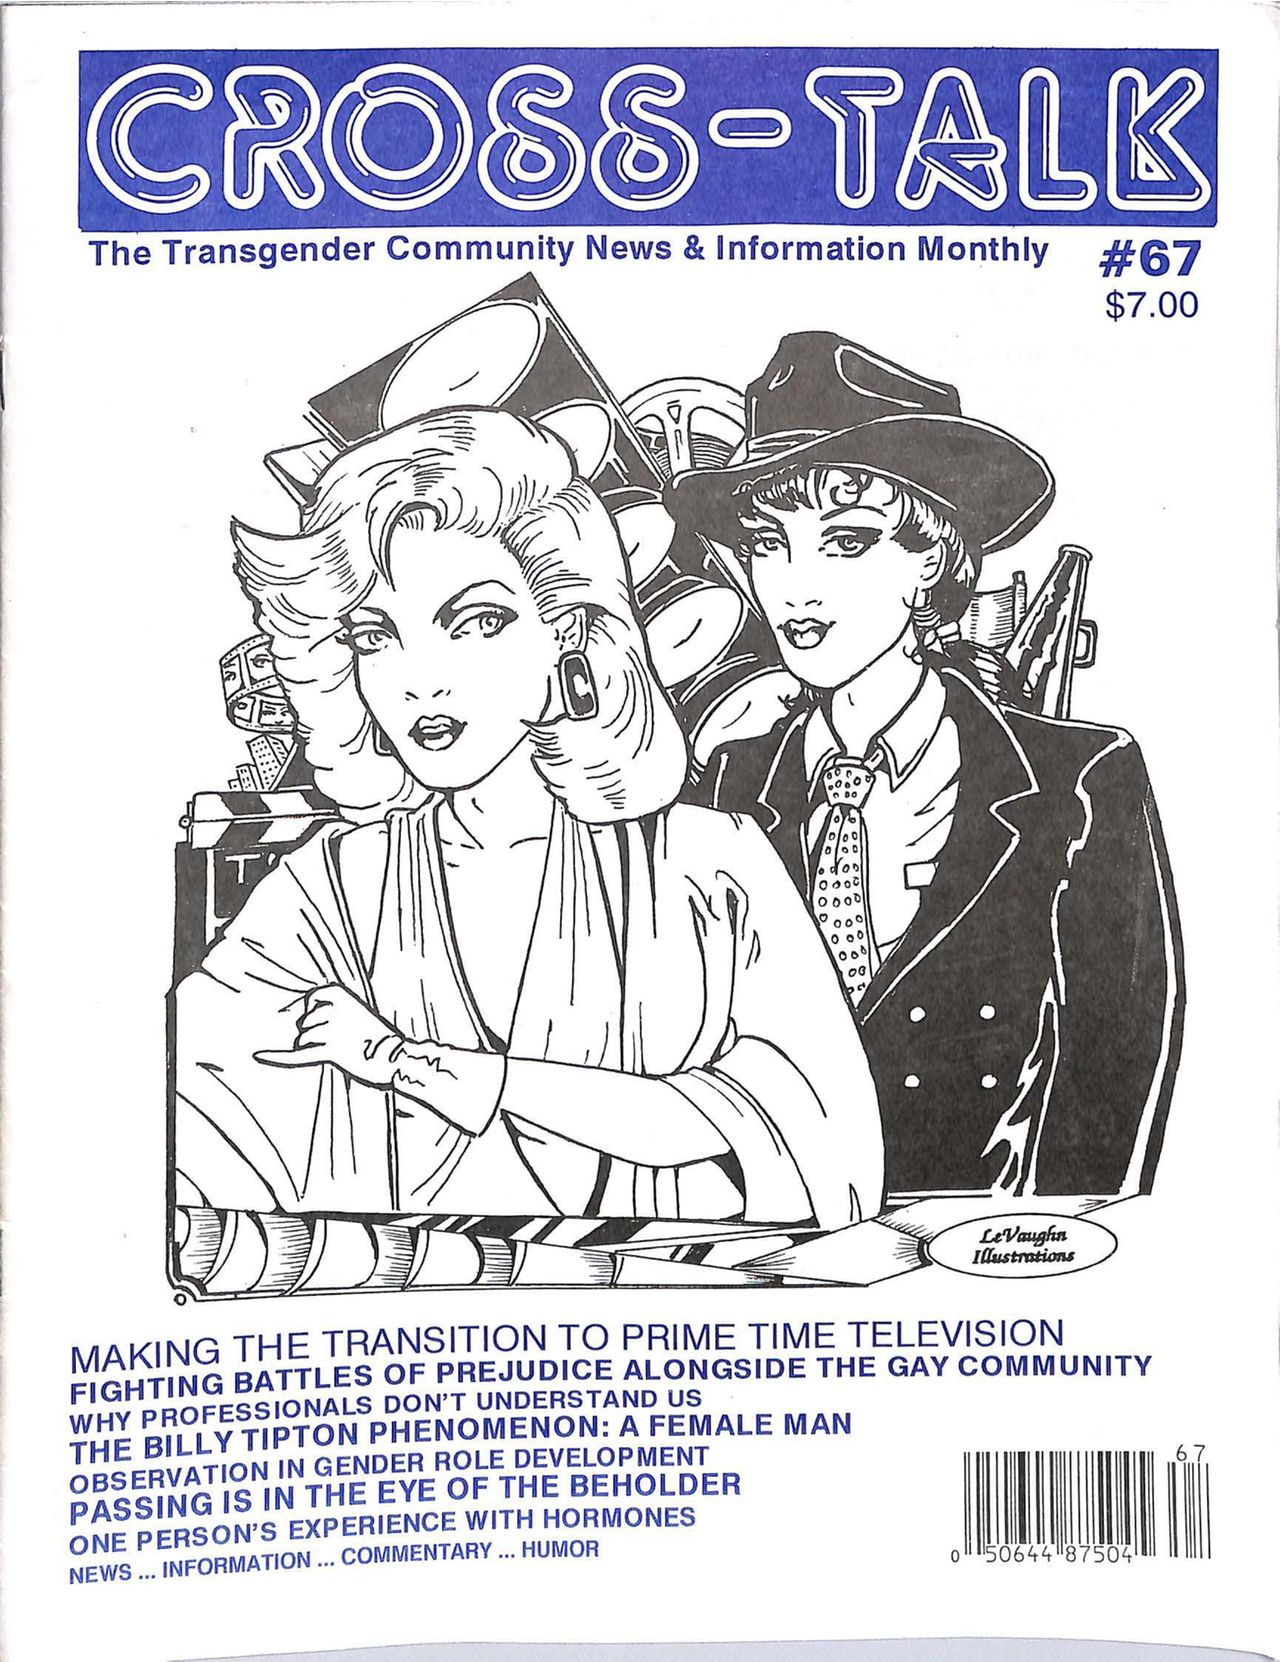 Cover of May 1995 issue of Cross-Talk (courtesy Lili Elbe Archive and Digital Transgender Archive)